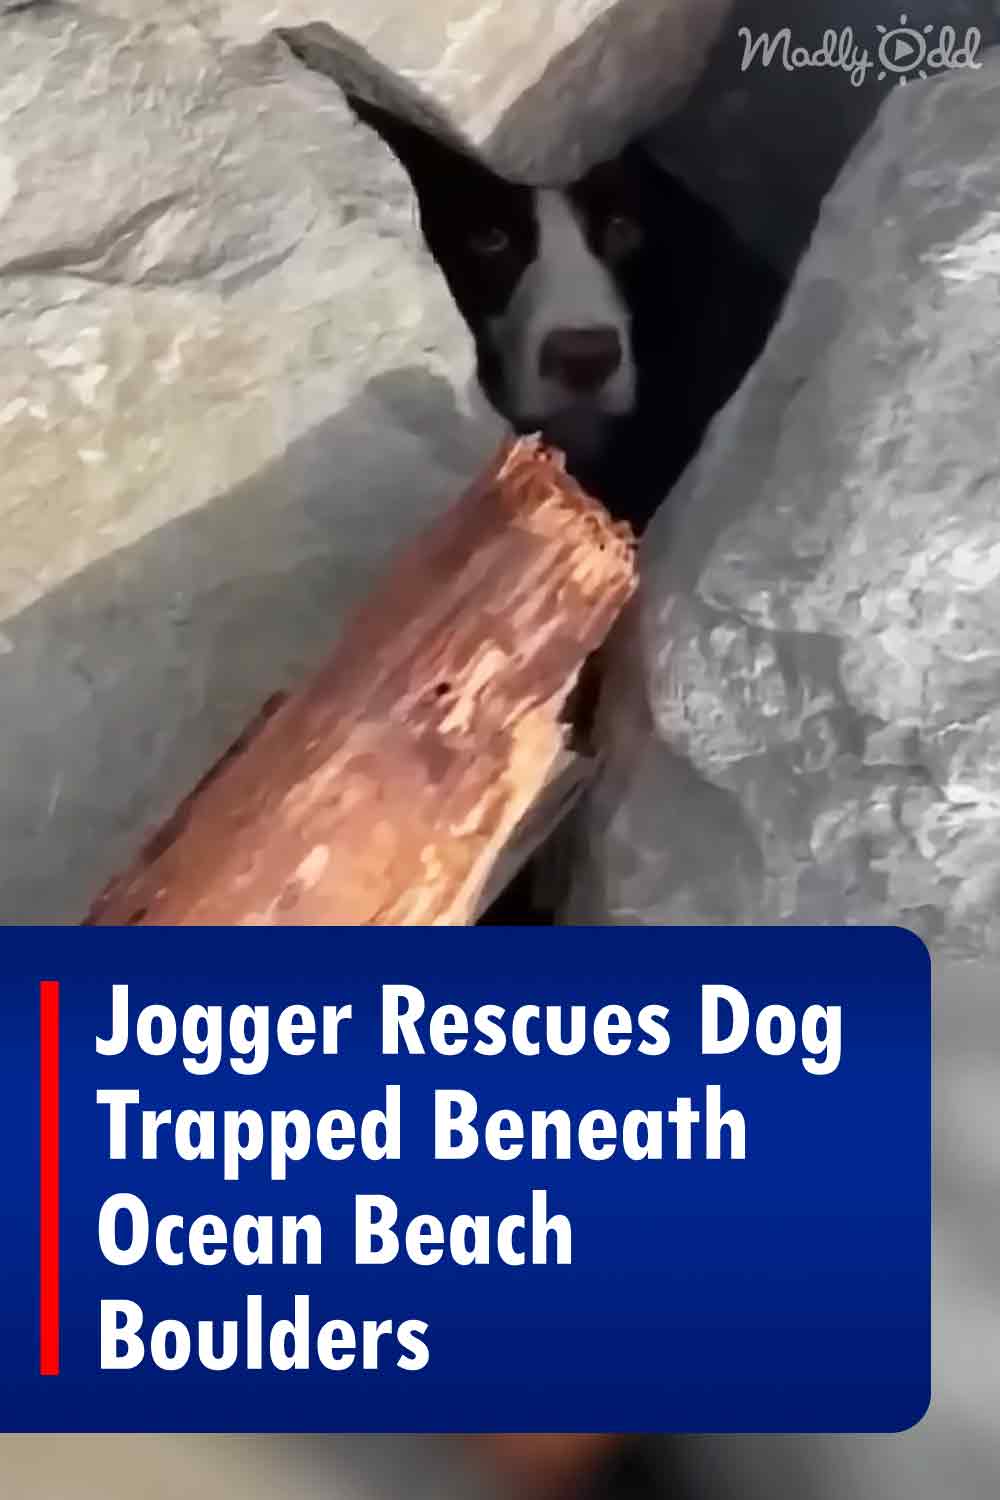 Jogger Rescues Dog Trapped Beneath Ocean Beach Boulders